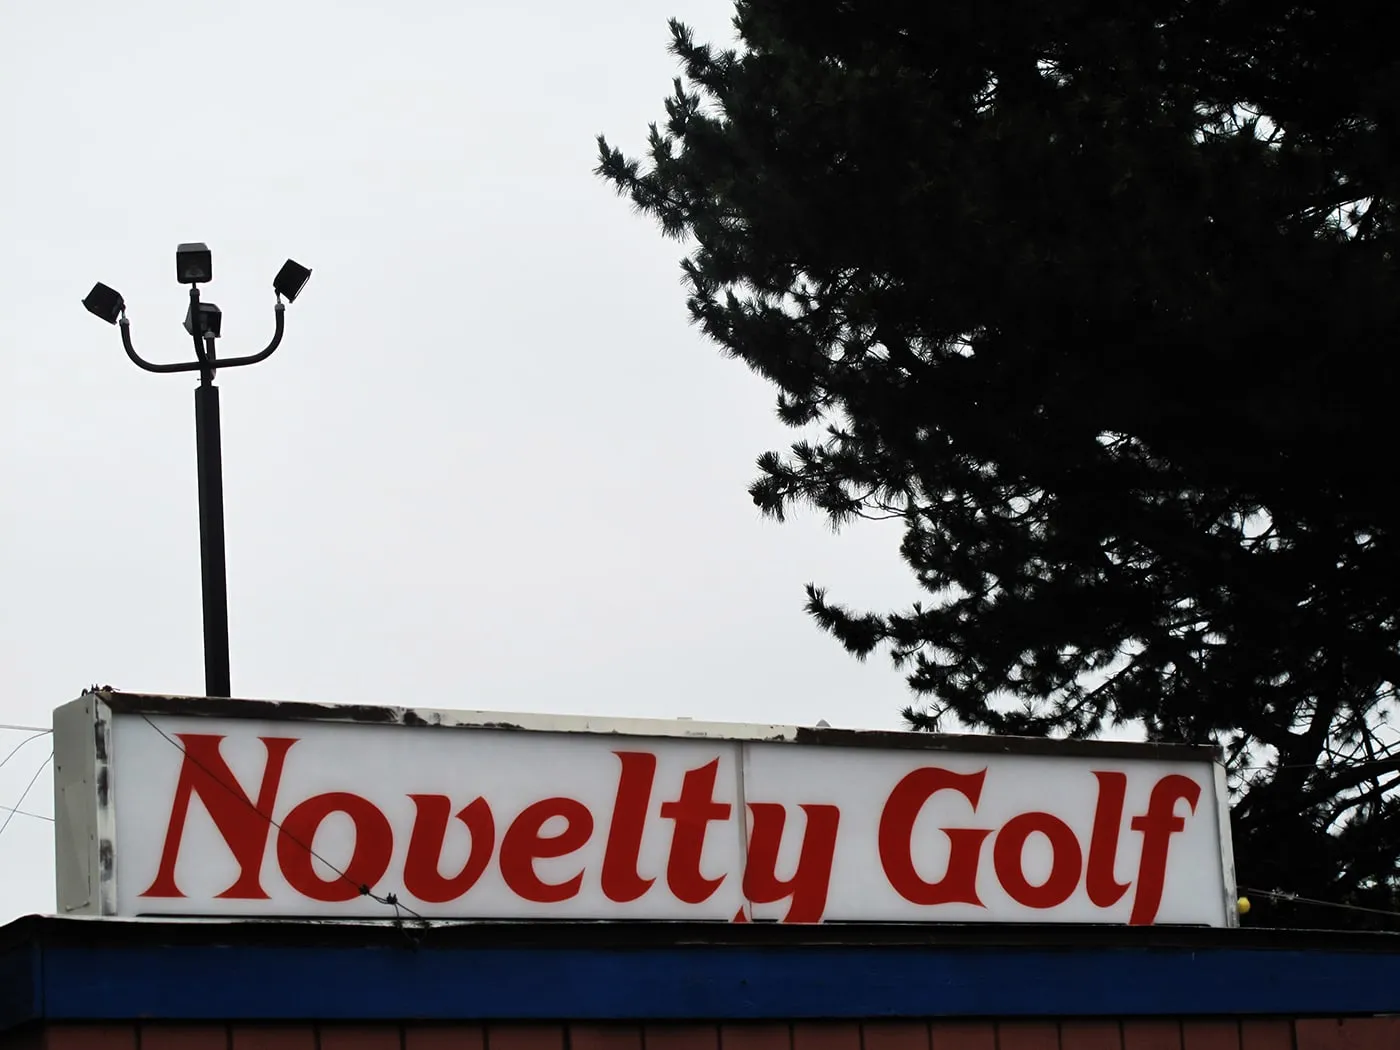 Novelty Golf in Lincolnwood, Illinois.